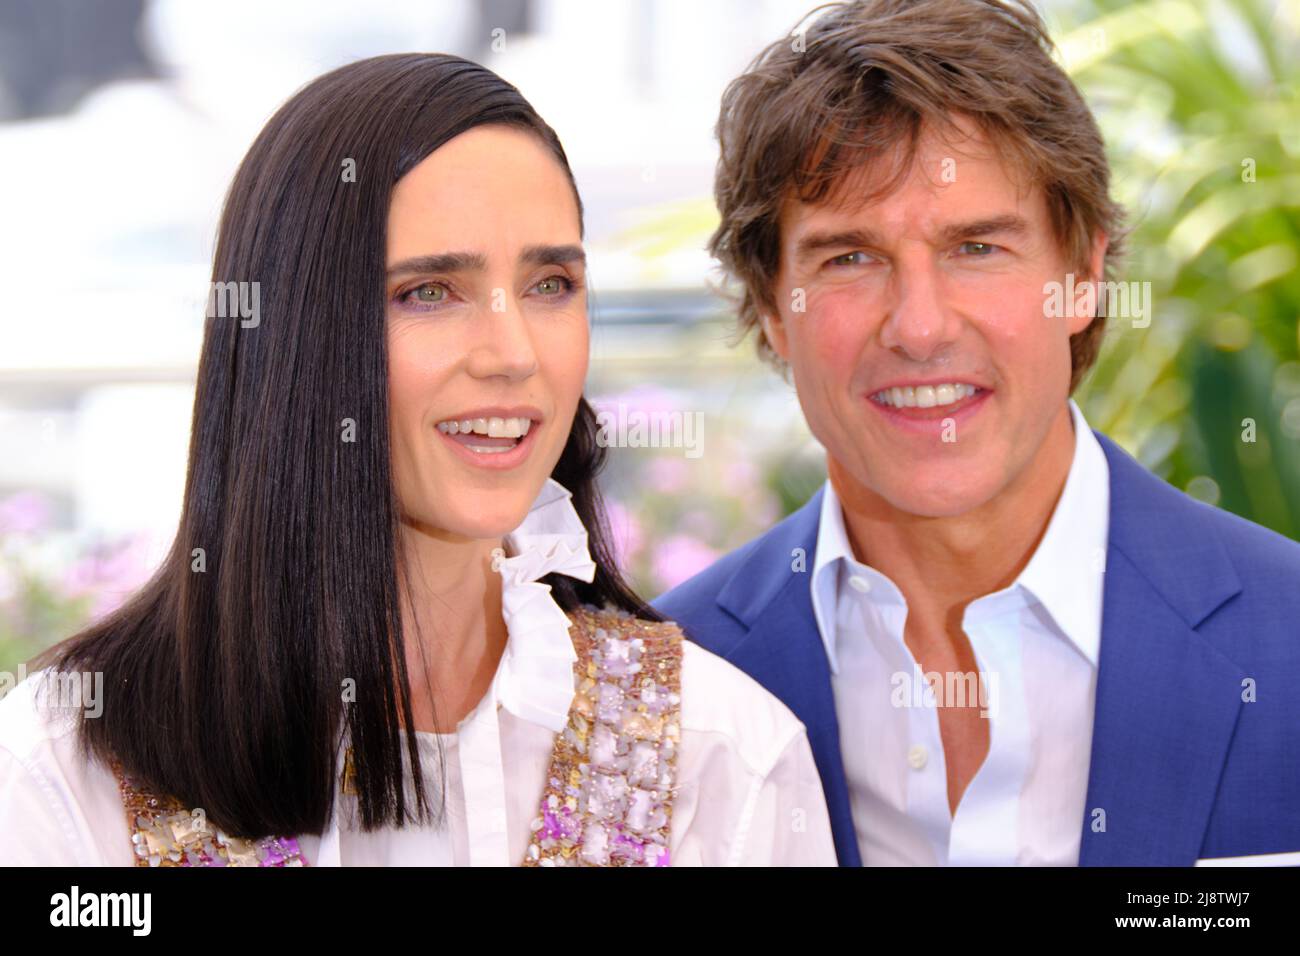 Cannes, France. 18th May, 2022. Tom Cruise at the Festival de Cannnes 2022 for Top Gun Maverick Credit: Fadege/Alamy Live News Stock Photo